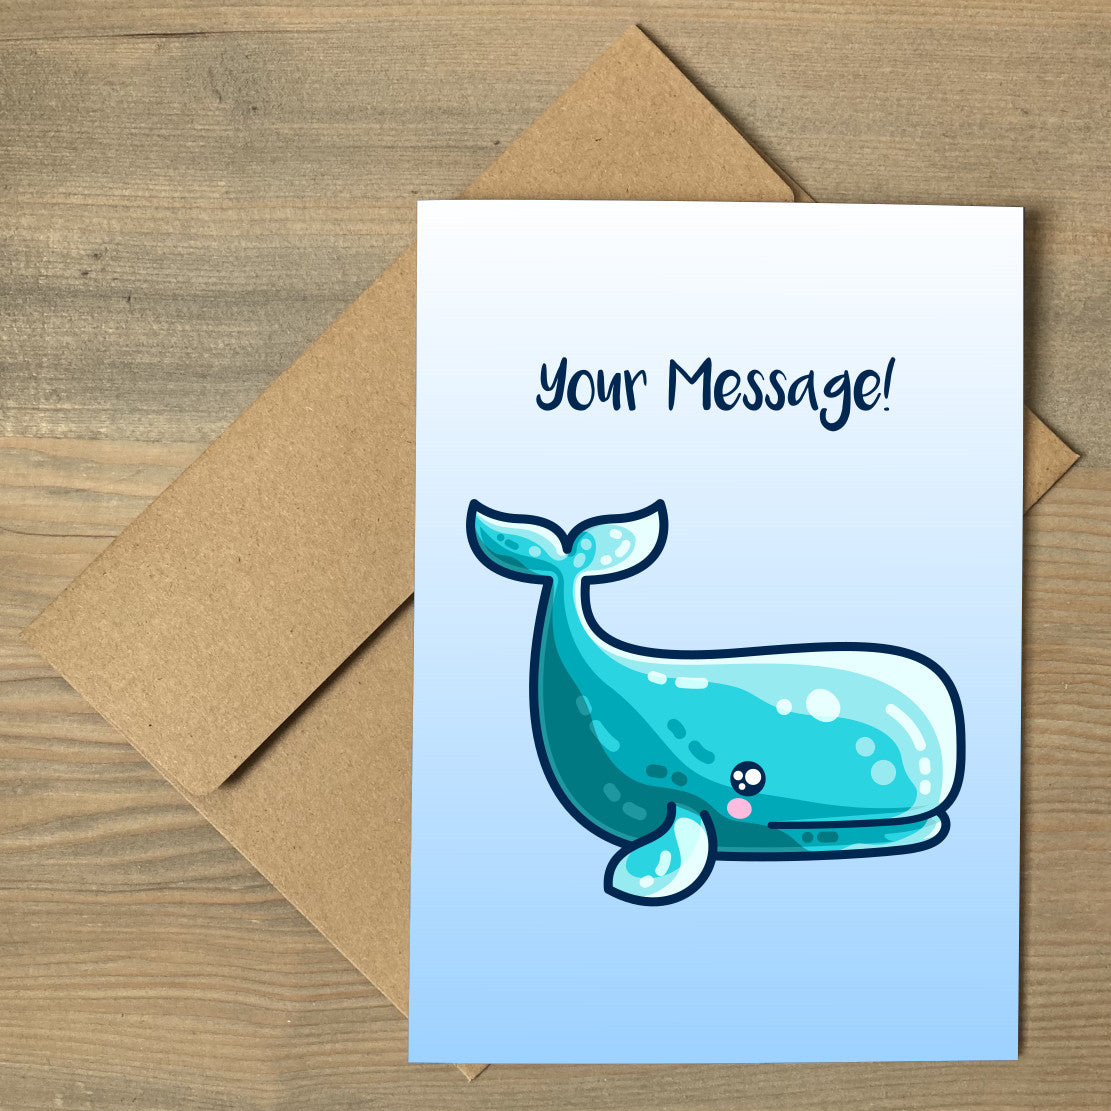 A white to blue gradiant greeting card lying flat on a brown envelope, with a design of a kawaii cute sperm whale looking to the right and a personalised message above